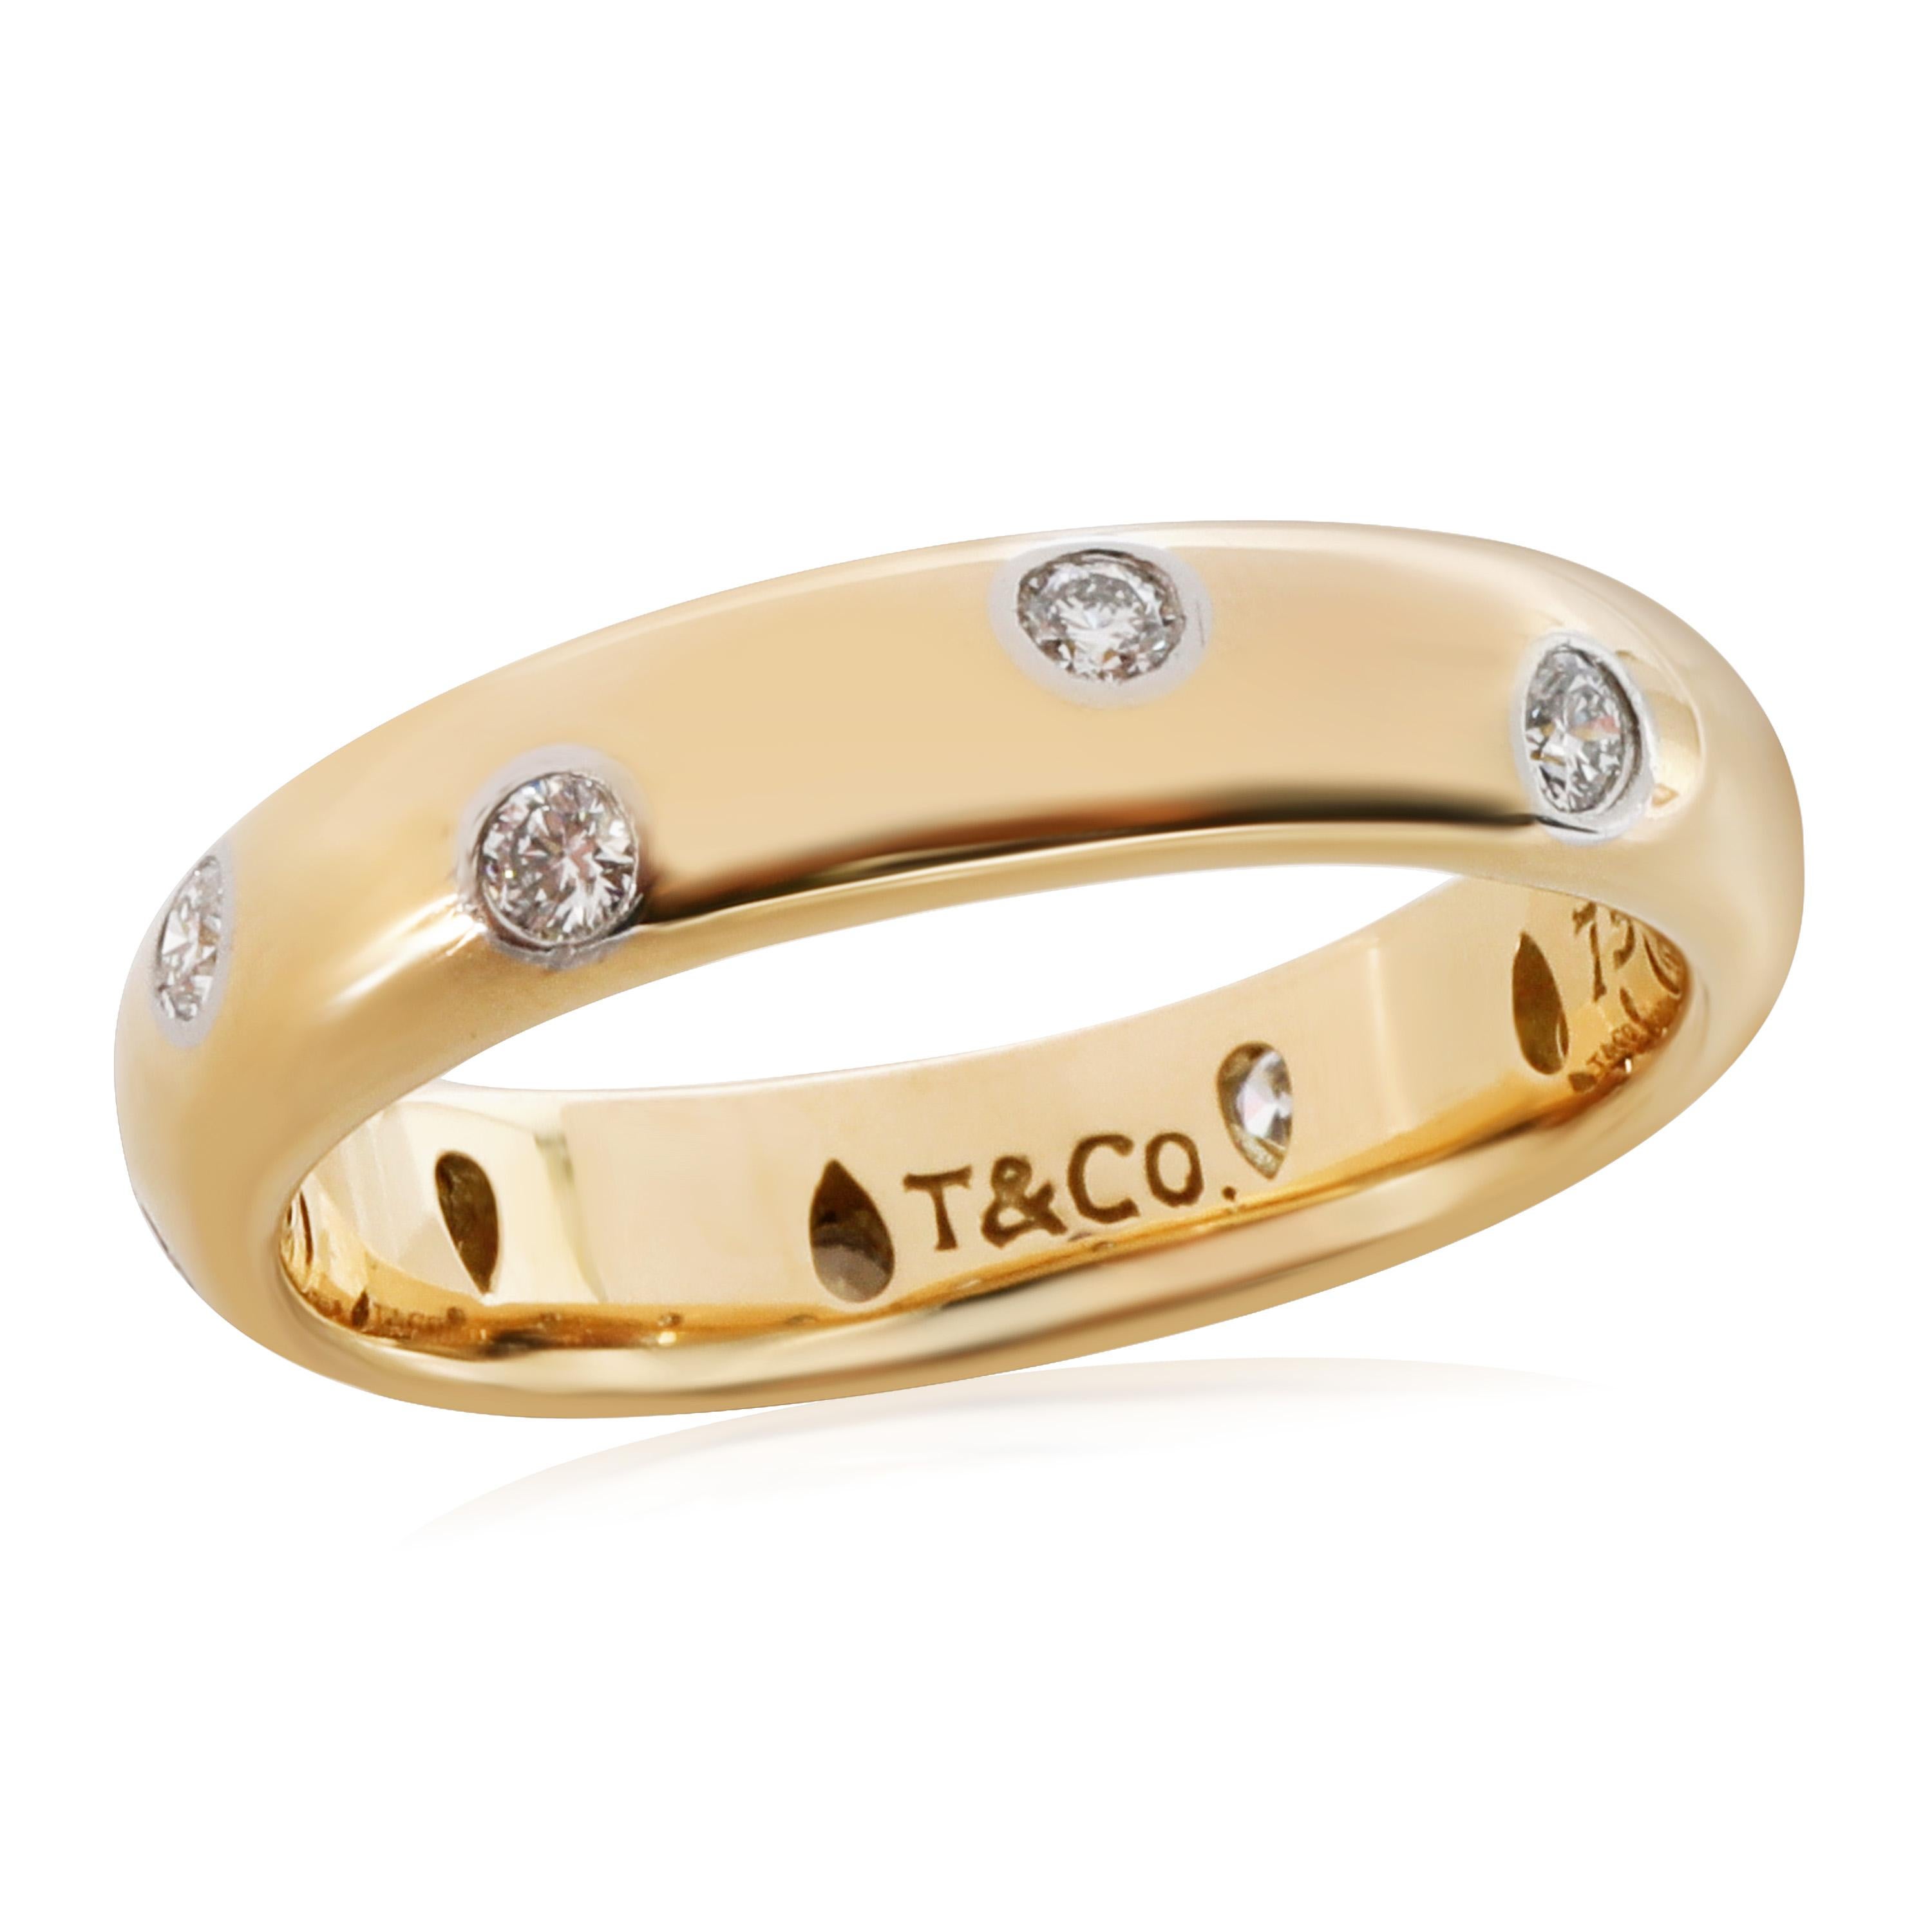 Tiffany & Co. Etoile Diamond Band in 18k Yellow Gold/Platinum 0.22 CTW

PRIMARY DETAILS
SKU: 125480
Listing Title: Tiffany & Co. Etoile Diamond Band in 18k Yellow Gold/Platinum 0.22 CTW
Condition Description: Retails for 2600 USD. In excellent